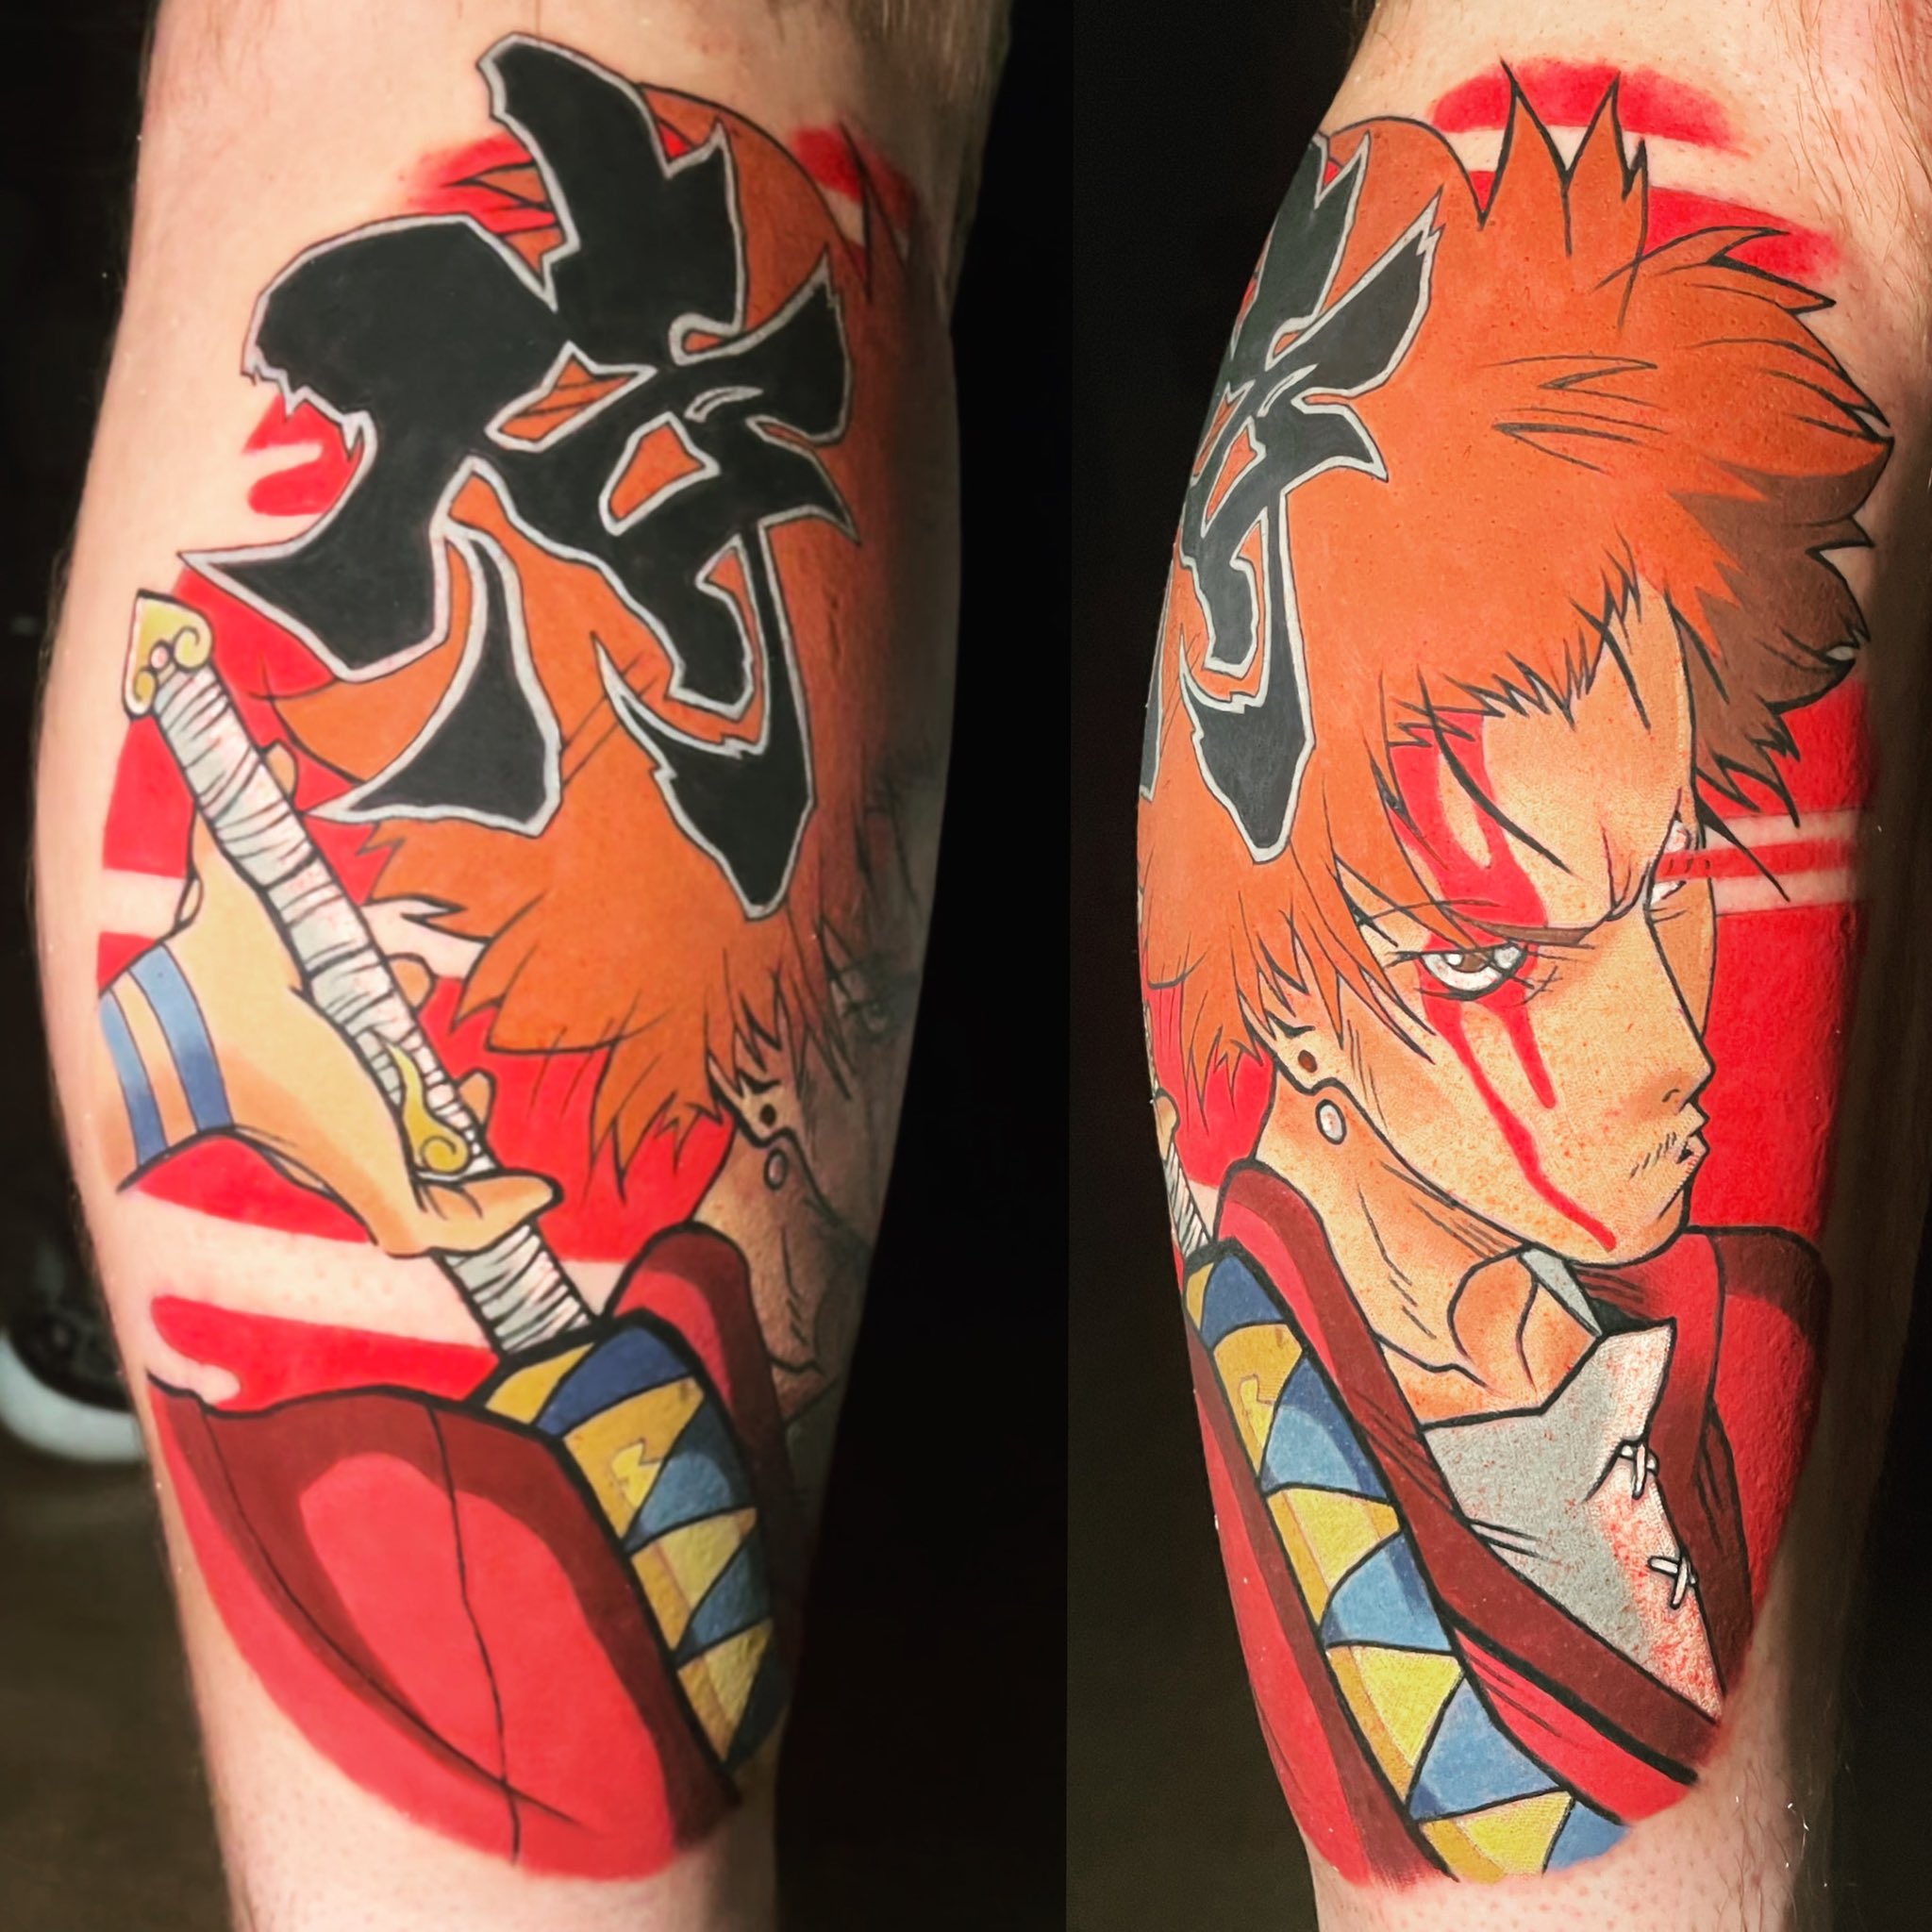 Jin from Samurai Champloo tattoo Can I just say that in the past I didnt  consider ever getting an anime tattoo but th  Anime tattoos Tattoos Samurai  champloo